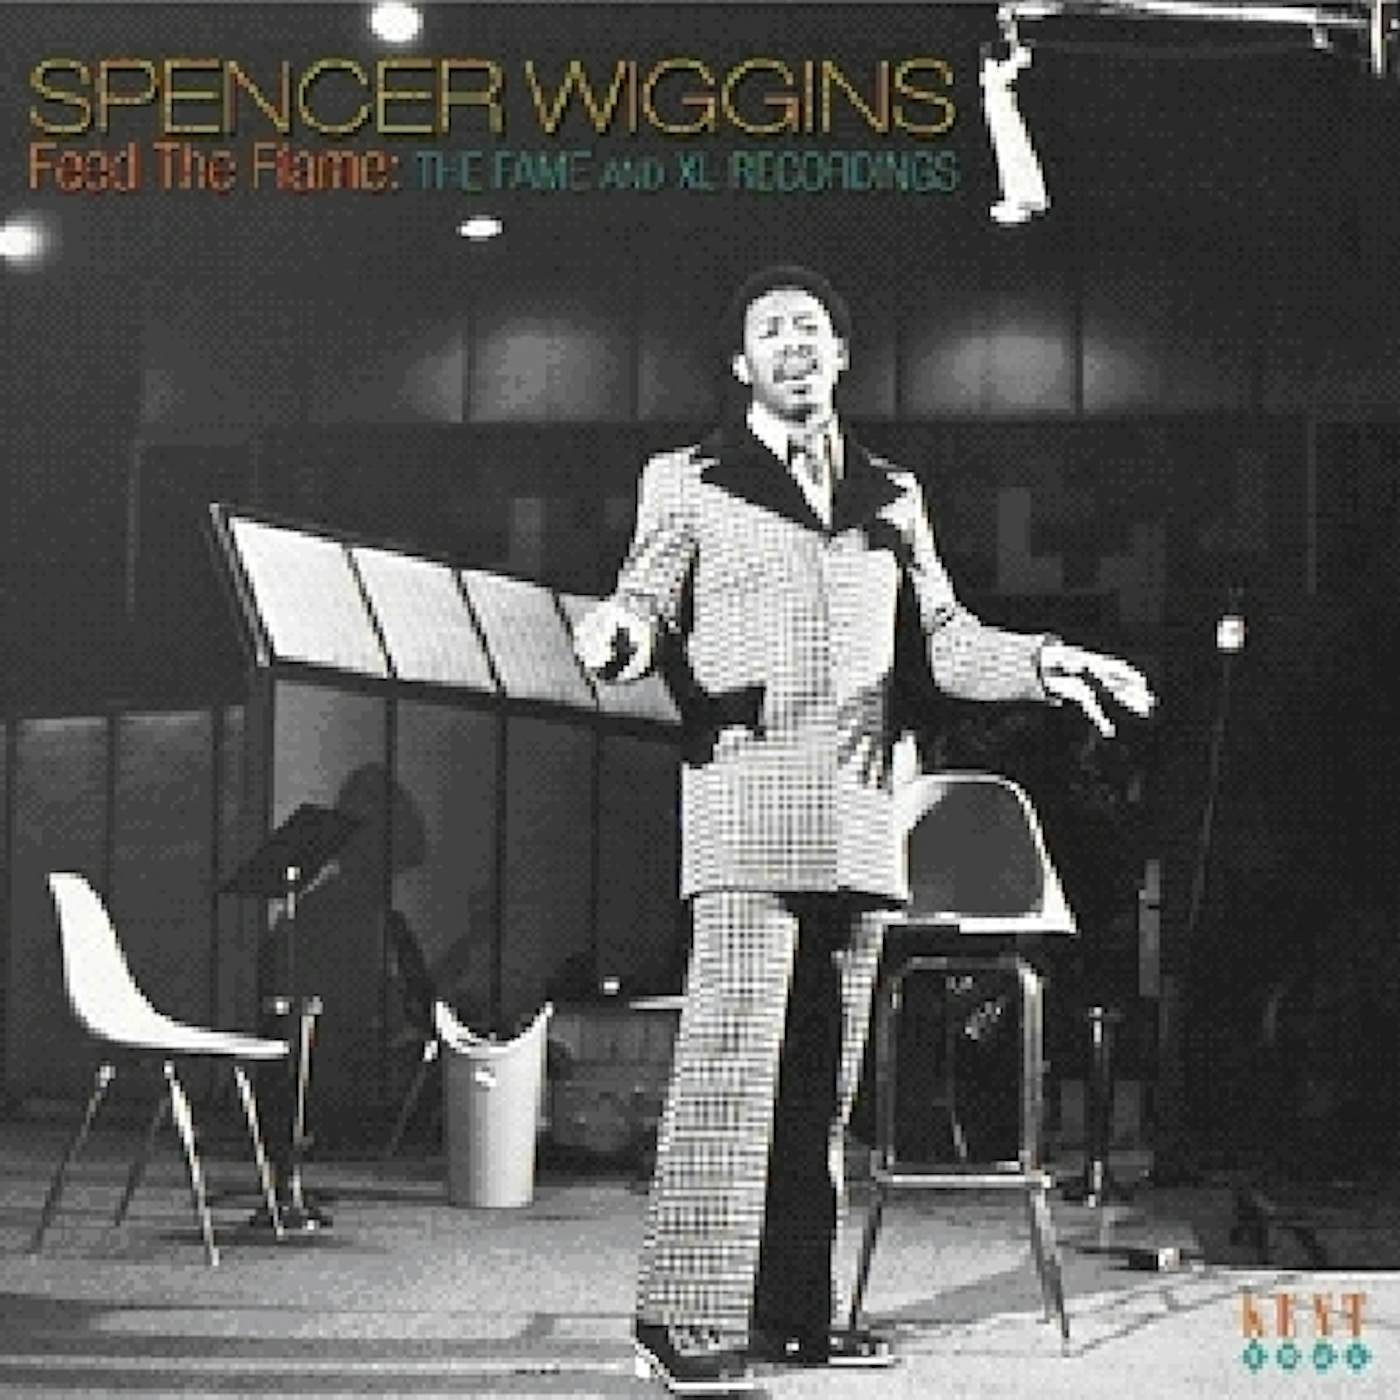 Spencer Wiggins FEED THE FLAME: FAME & XL RECORDINGS CD